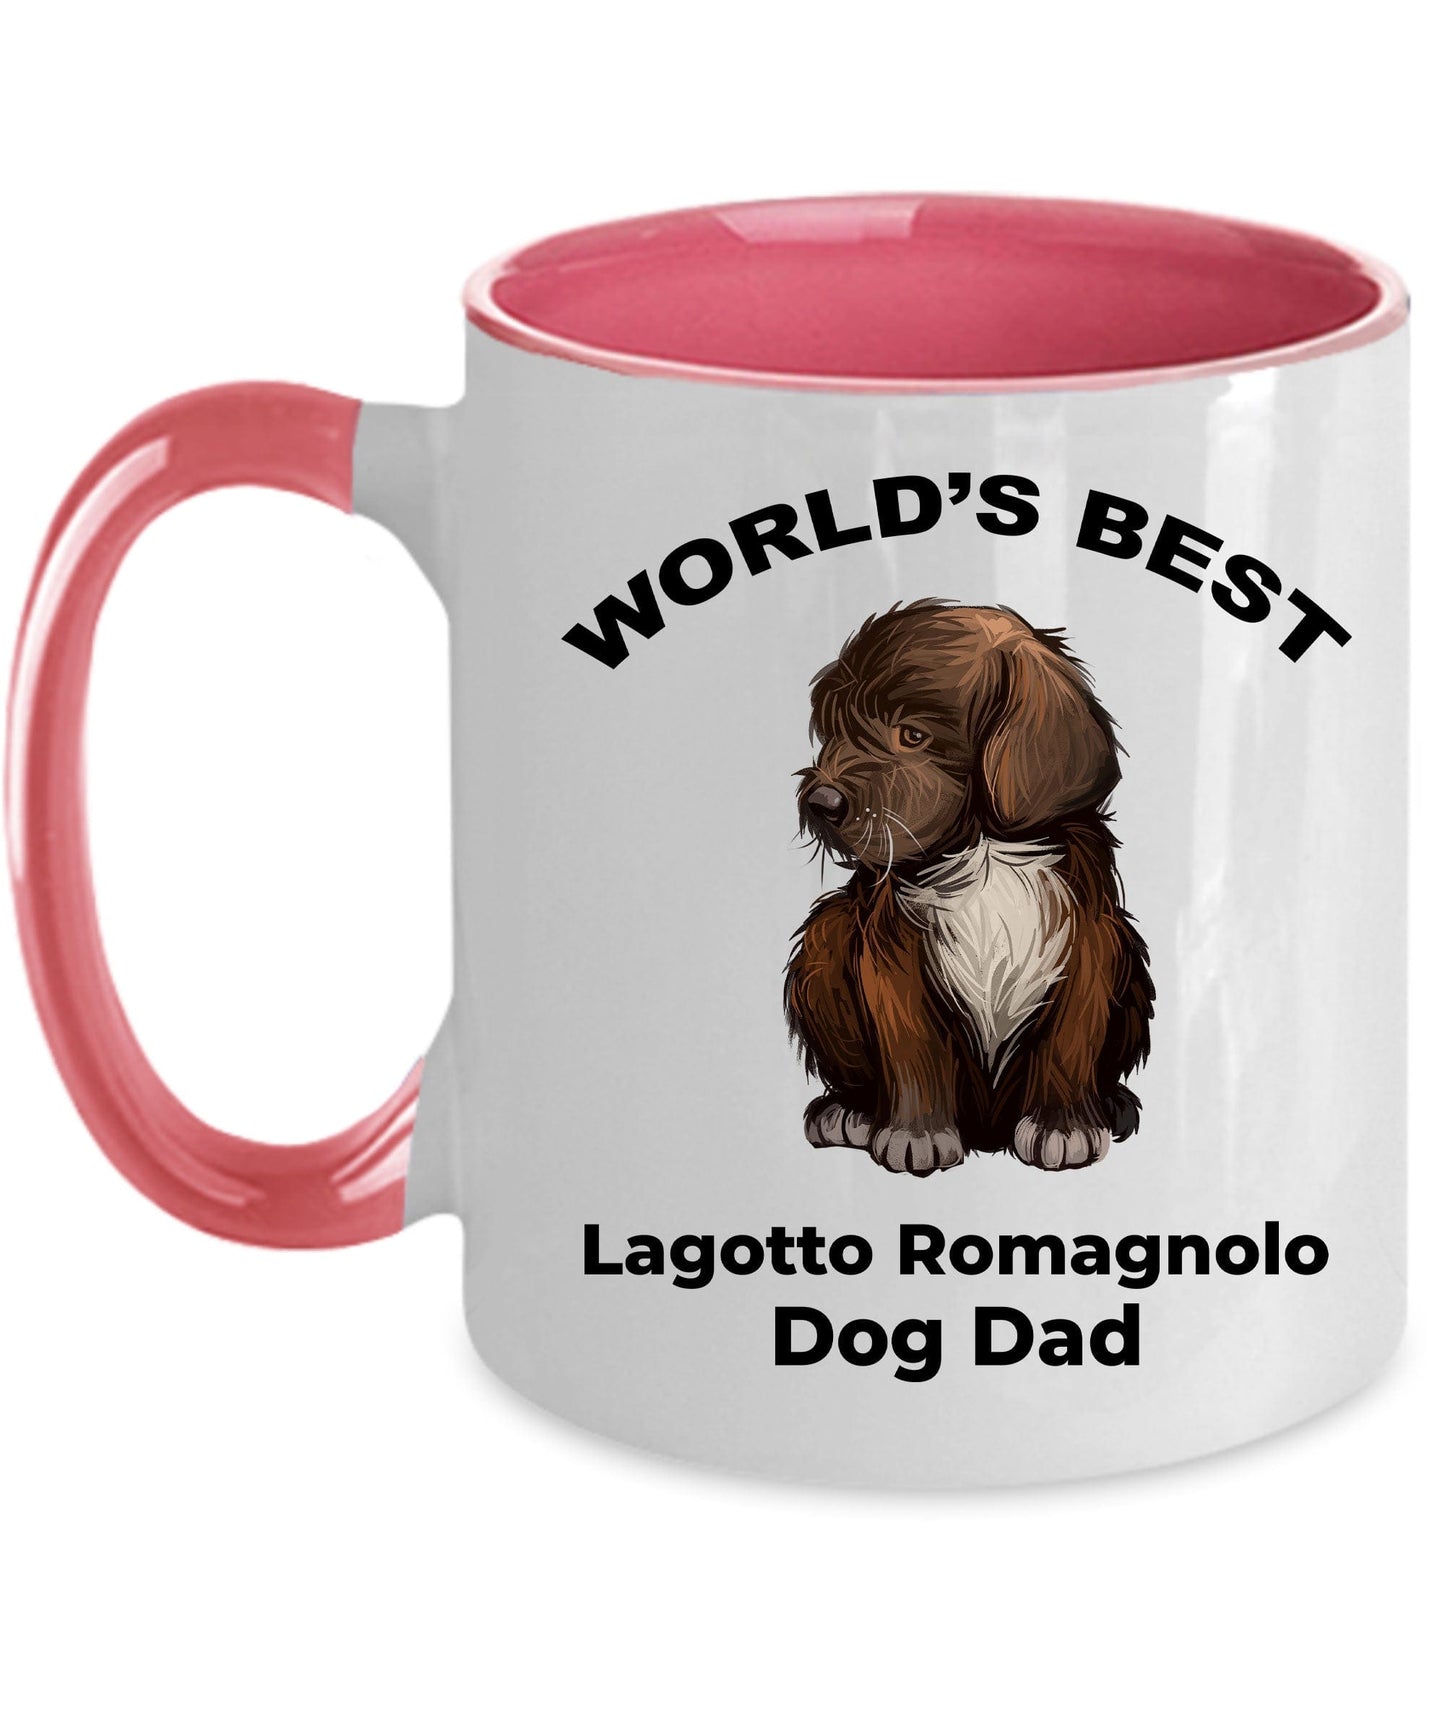 Lagotto Romagnolo Best Dog Dad ceramic coffee mug - can be customized